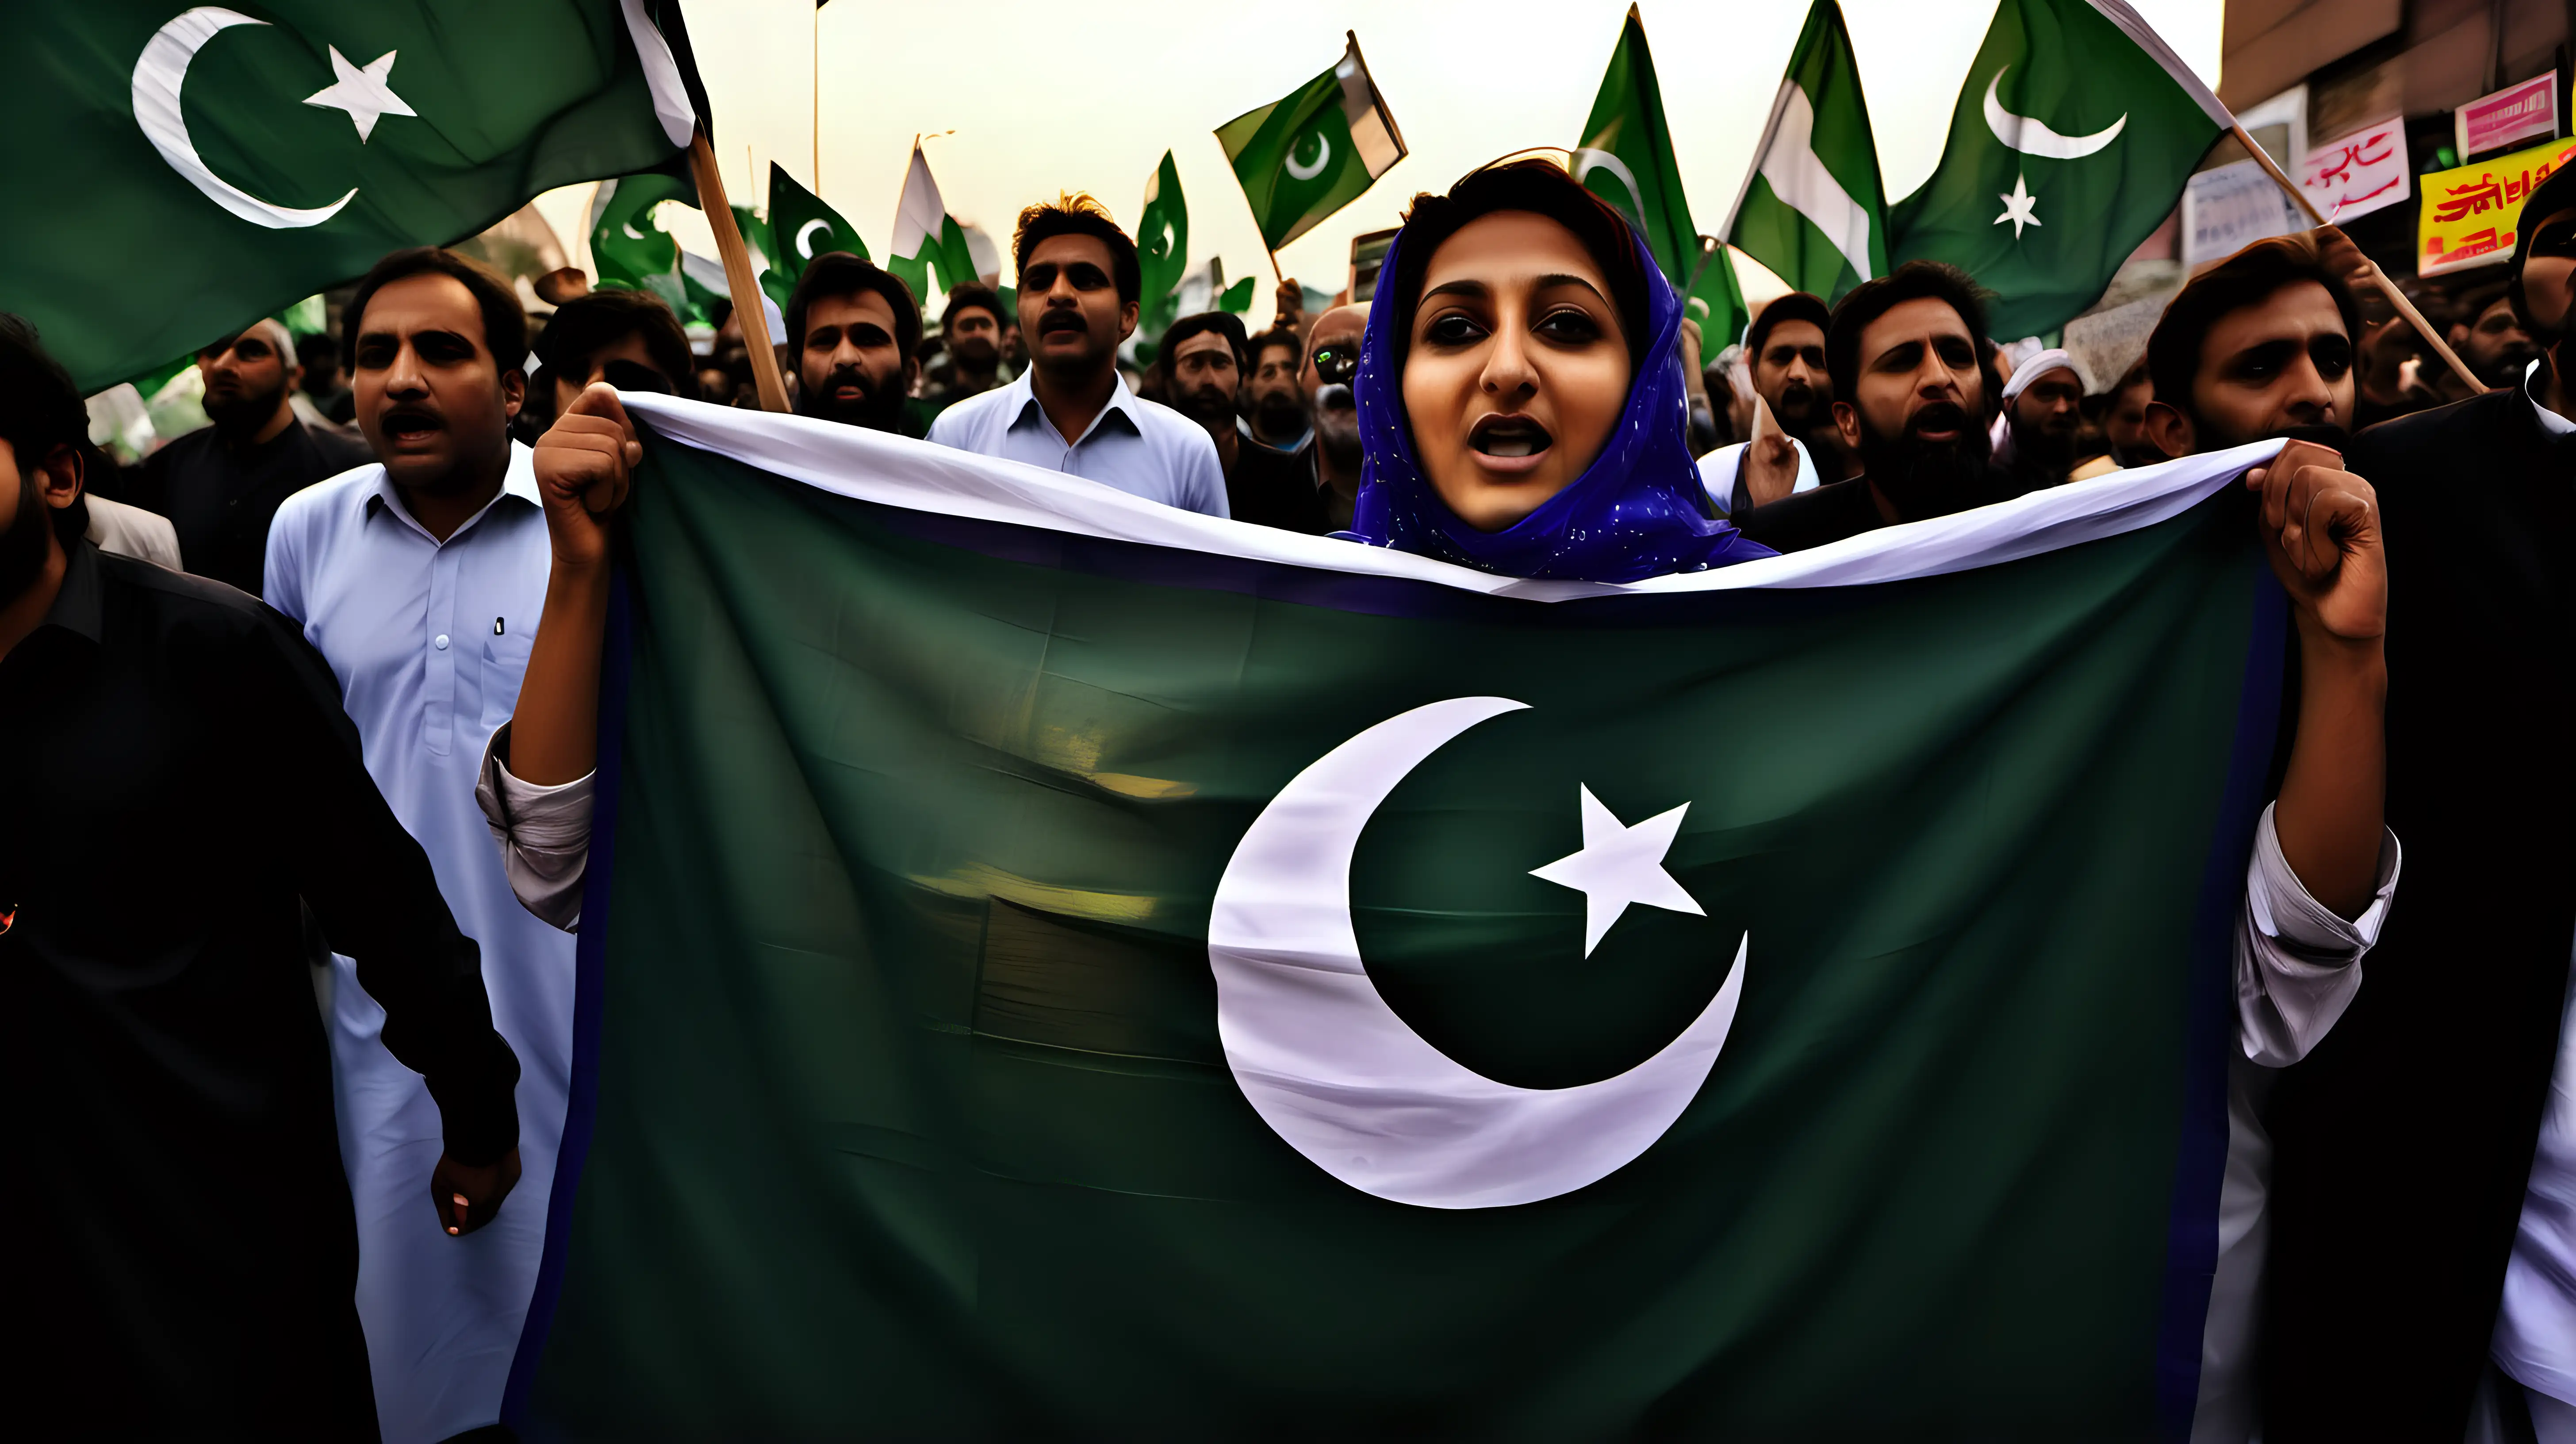 Passionate Pakistani Activist Holding Glowing Flag of Justice and Unity